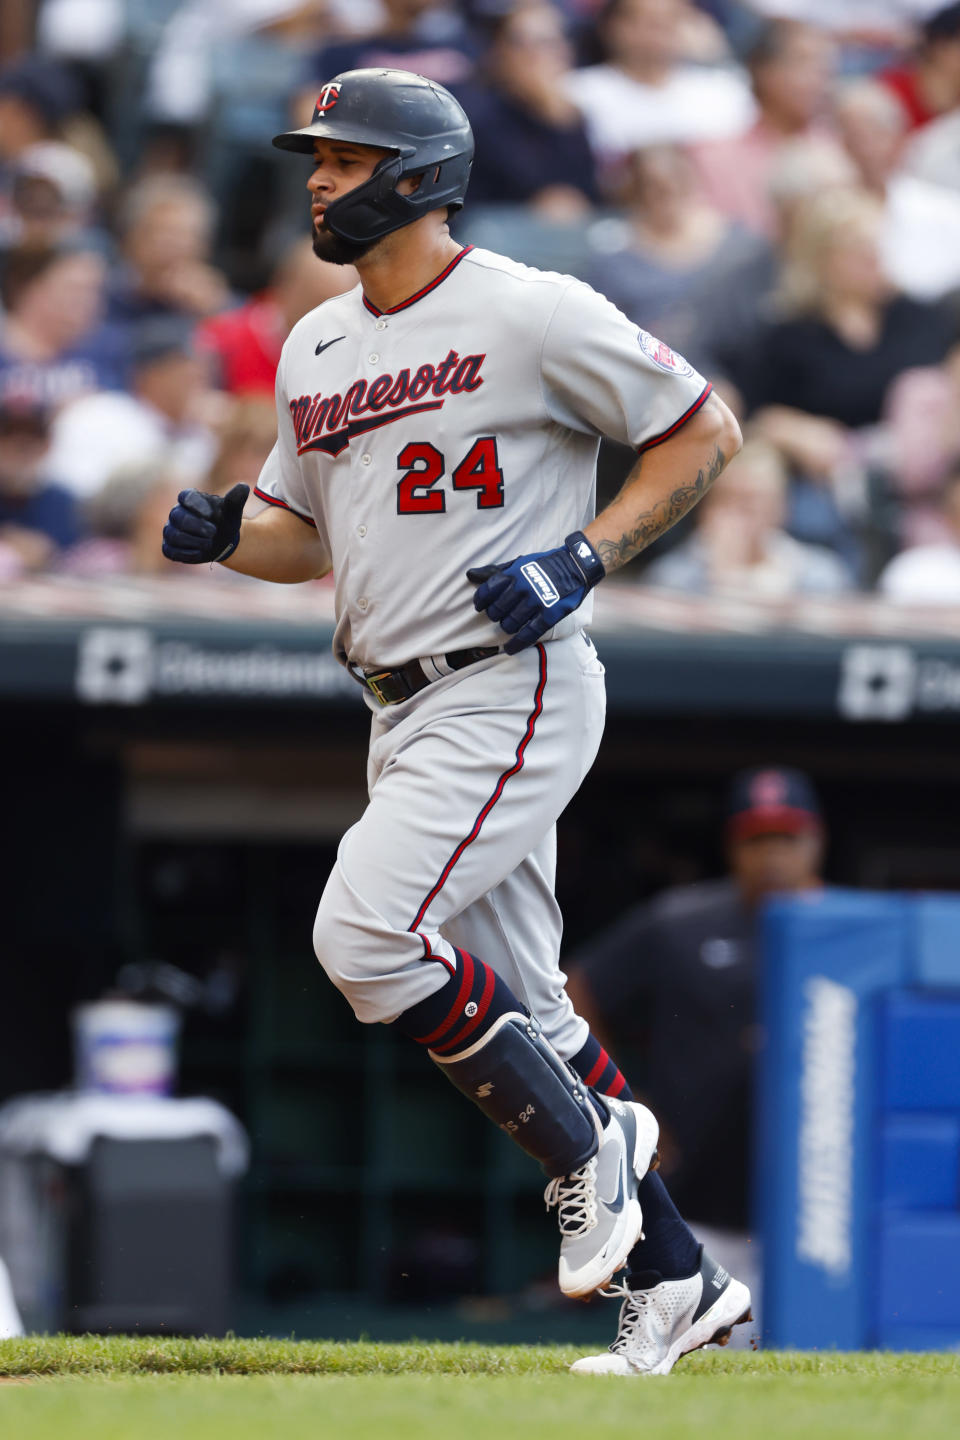 Minnesota Twins designated hitter Gary Sanchez rounds the bases after hitting a three-run home run against the Cleveland Guardians during the second inning of a baseball game Monday, June 27, 2022, in Cleveland. (AP Photo/Ron Schwane)